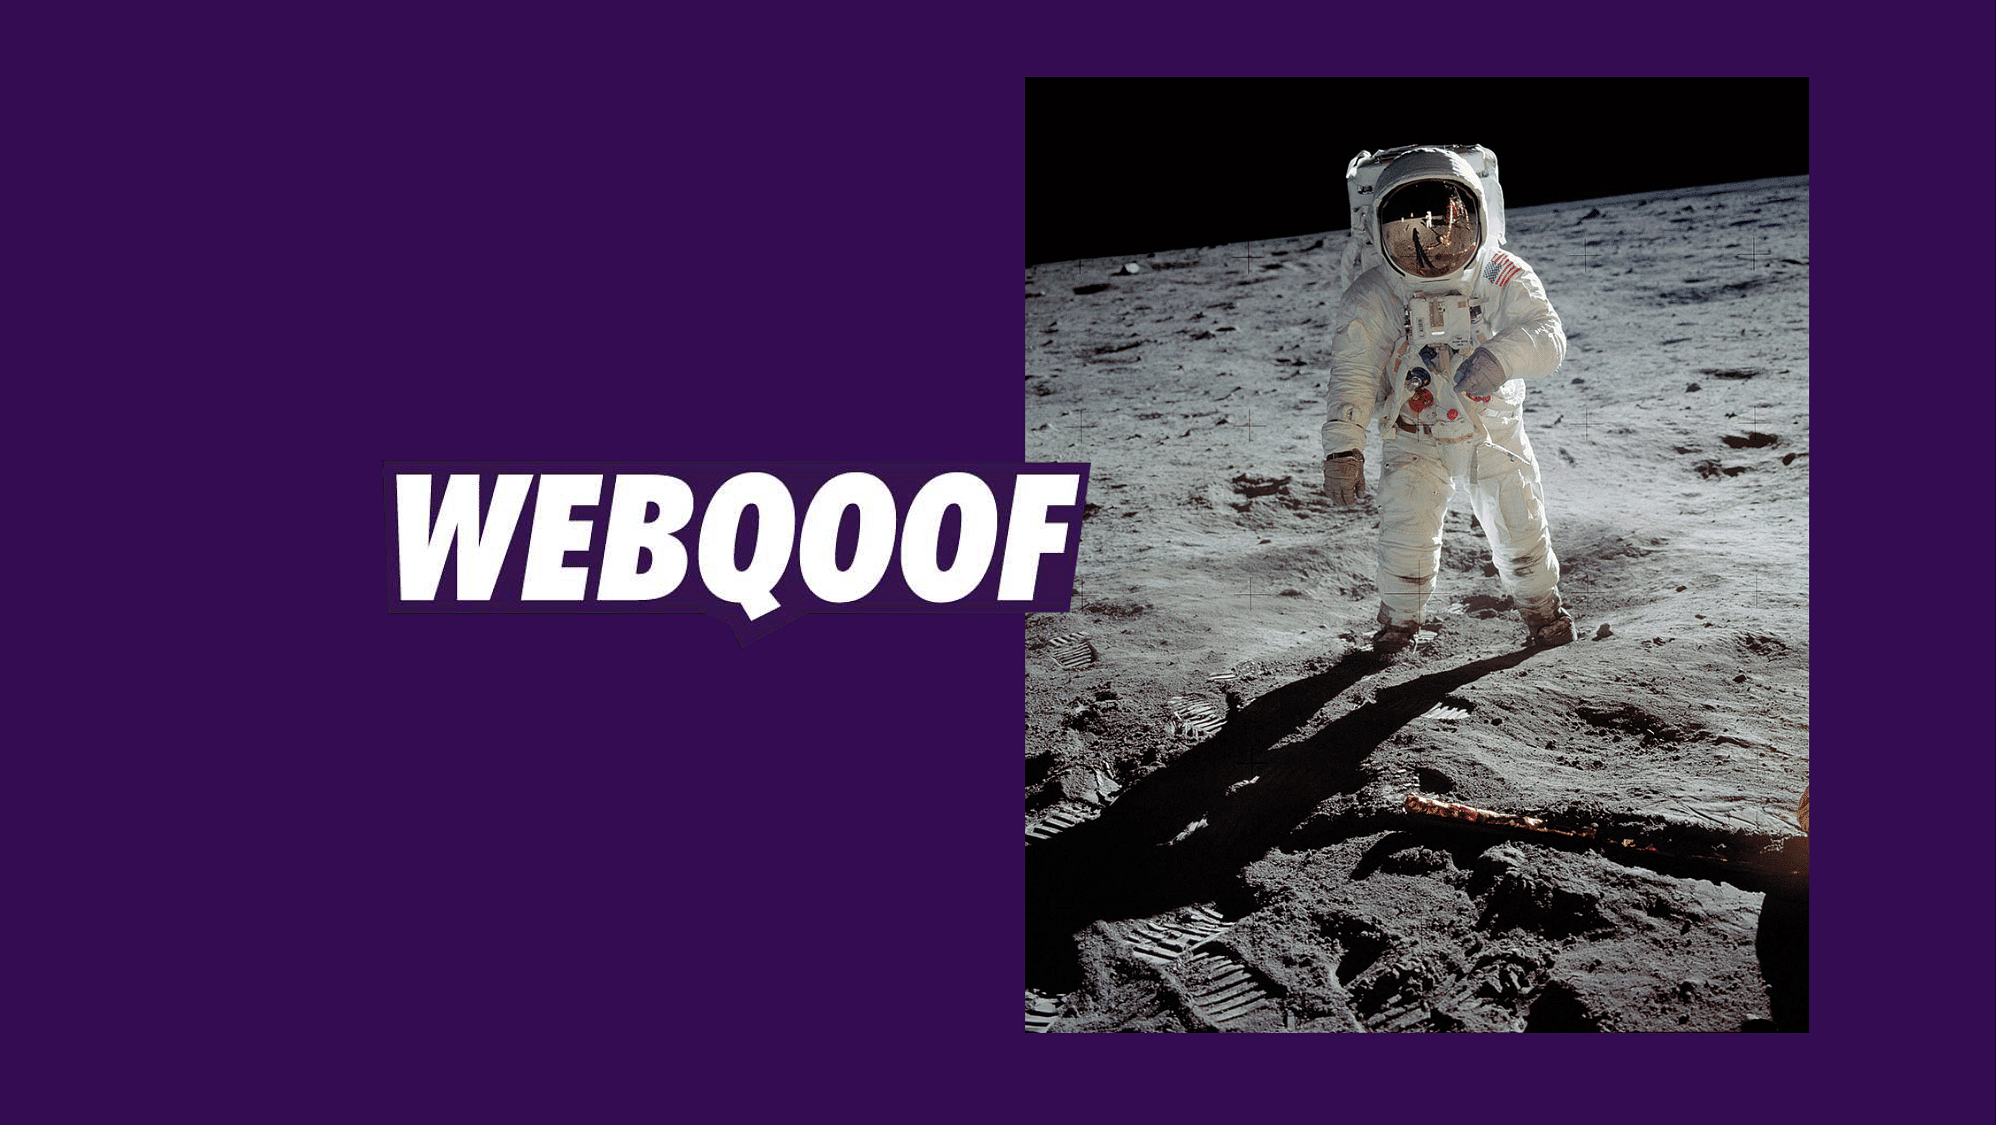 Ahead of the 50th anniversary of Apollo 11’s mission to the moon, we look at one of the oldest fake news about it.